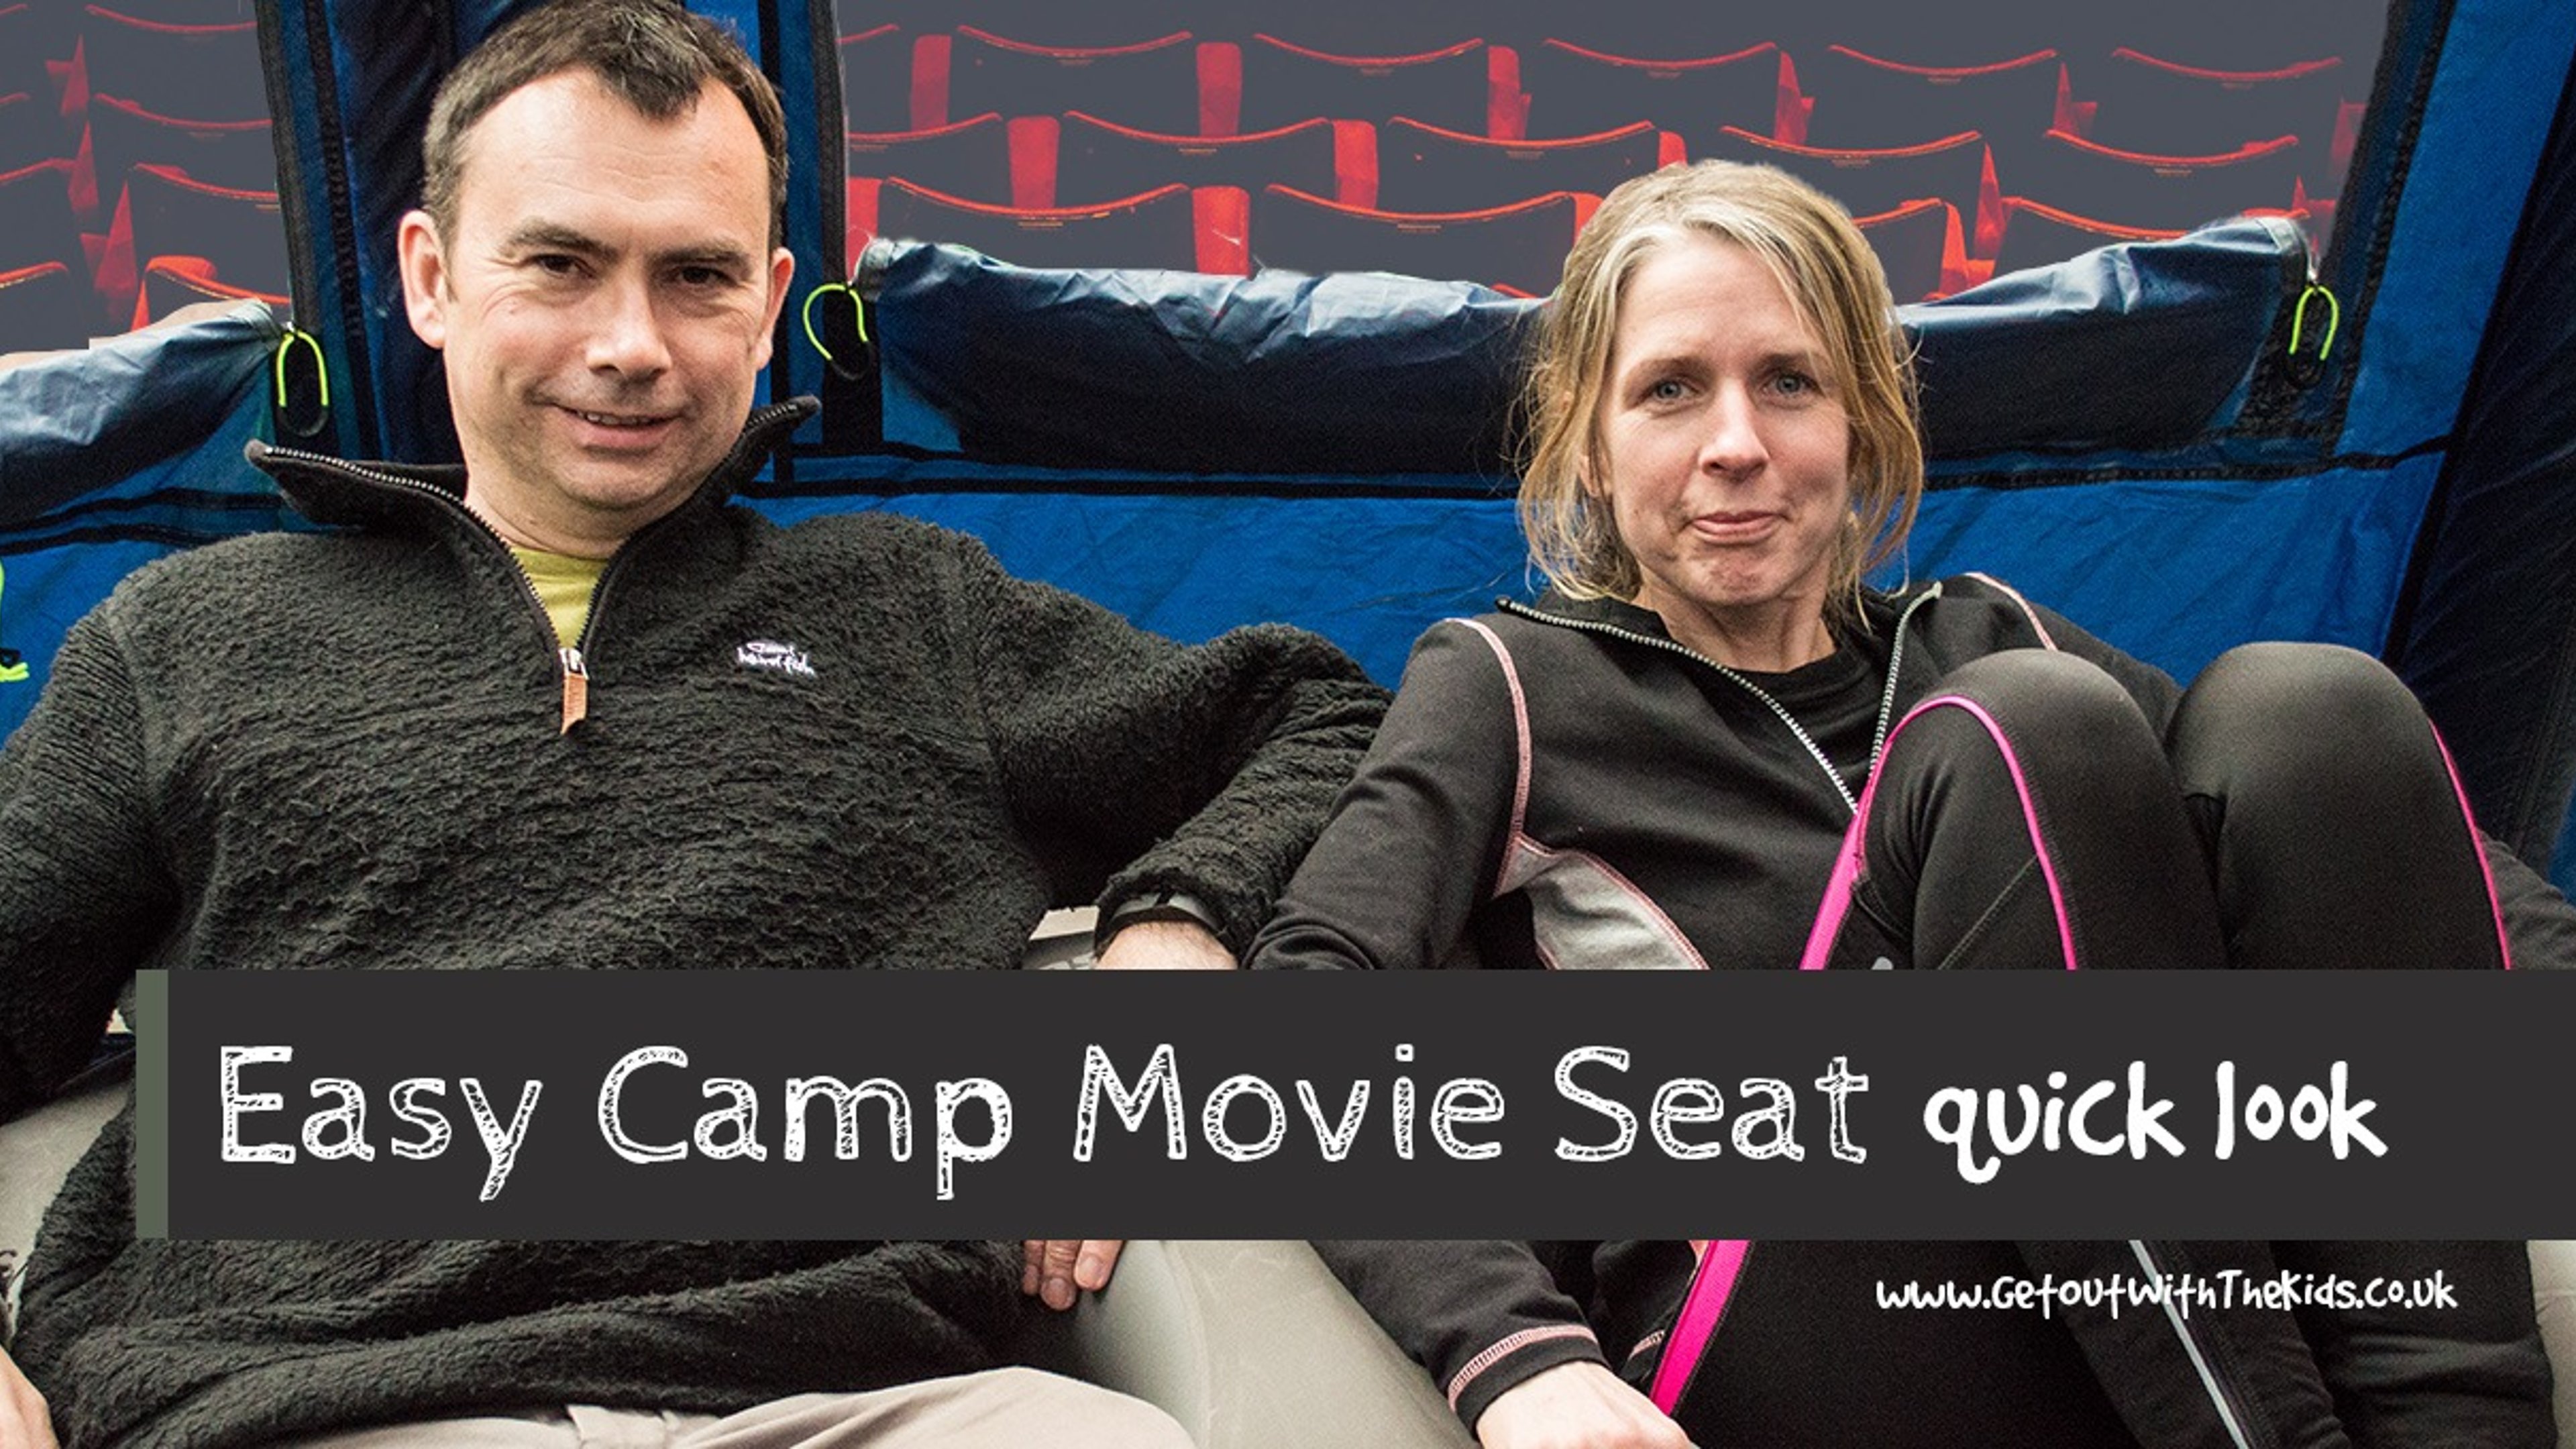 A quick look at the Easy Camp Movie Seat